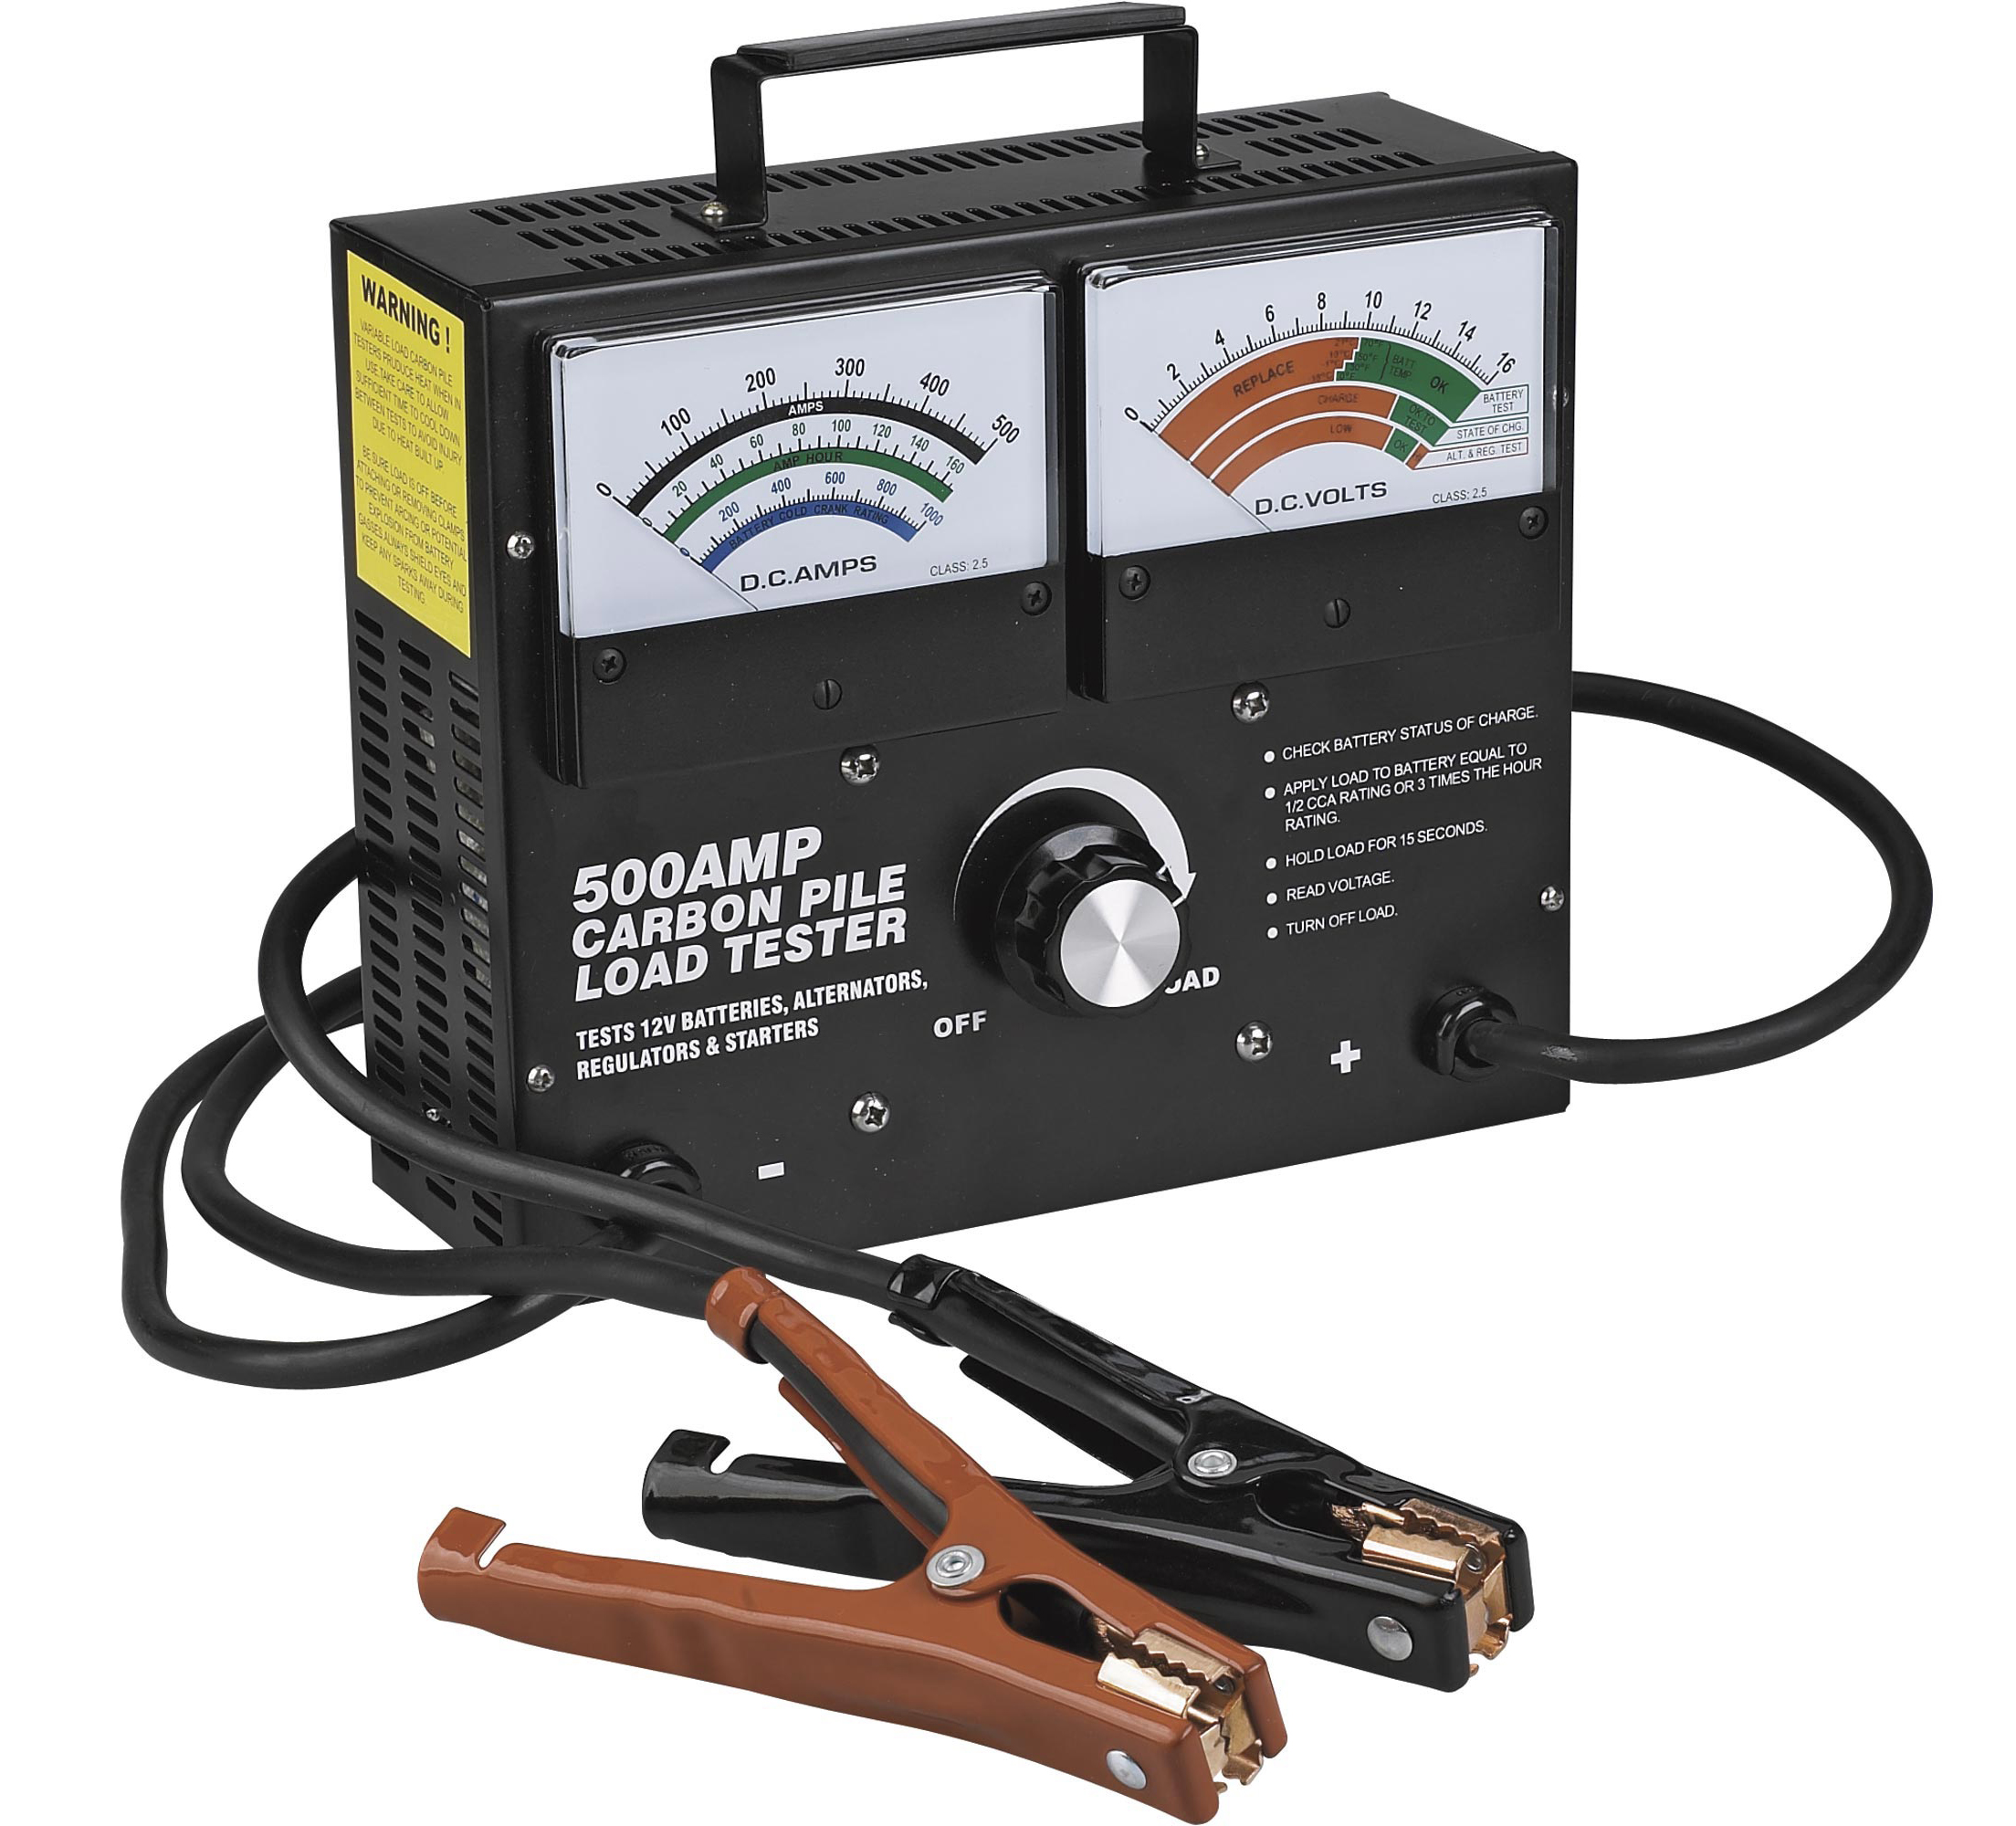 National Indoor RV Centers blog Mark Quasius Battery Care and Maintenance for Class A Class C motorhome-carbon pile tester-10